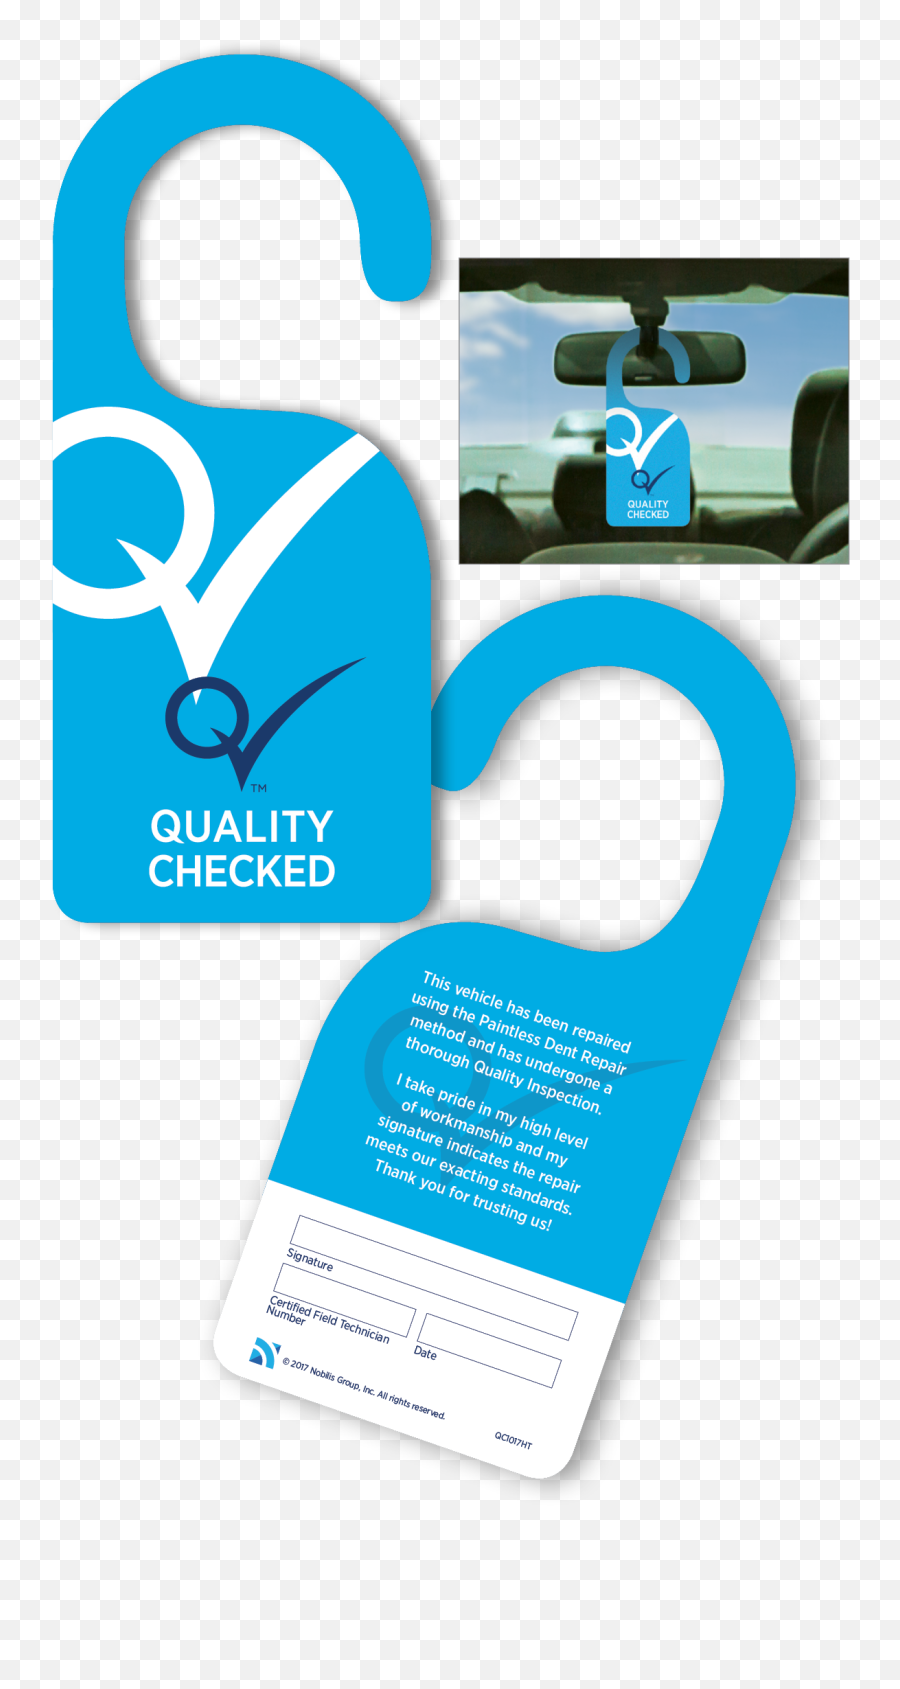 Download The Pdr Linx Quality Checked Program Is Our - Graphic Design Png,Hallmark Logo Png